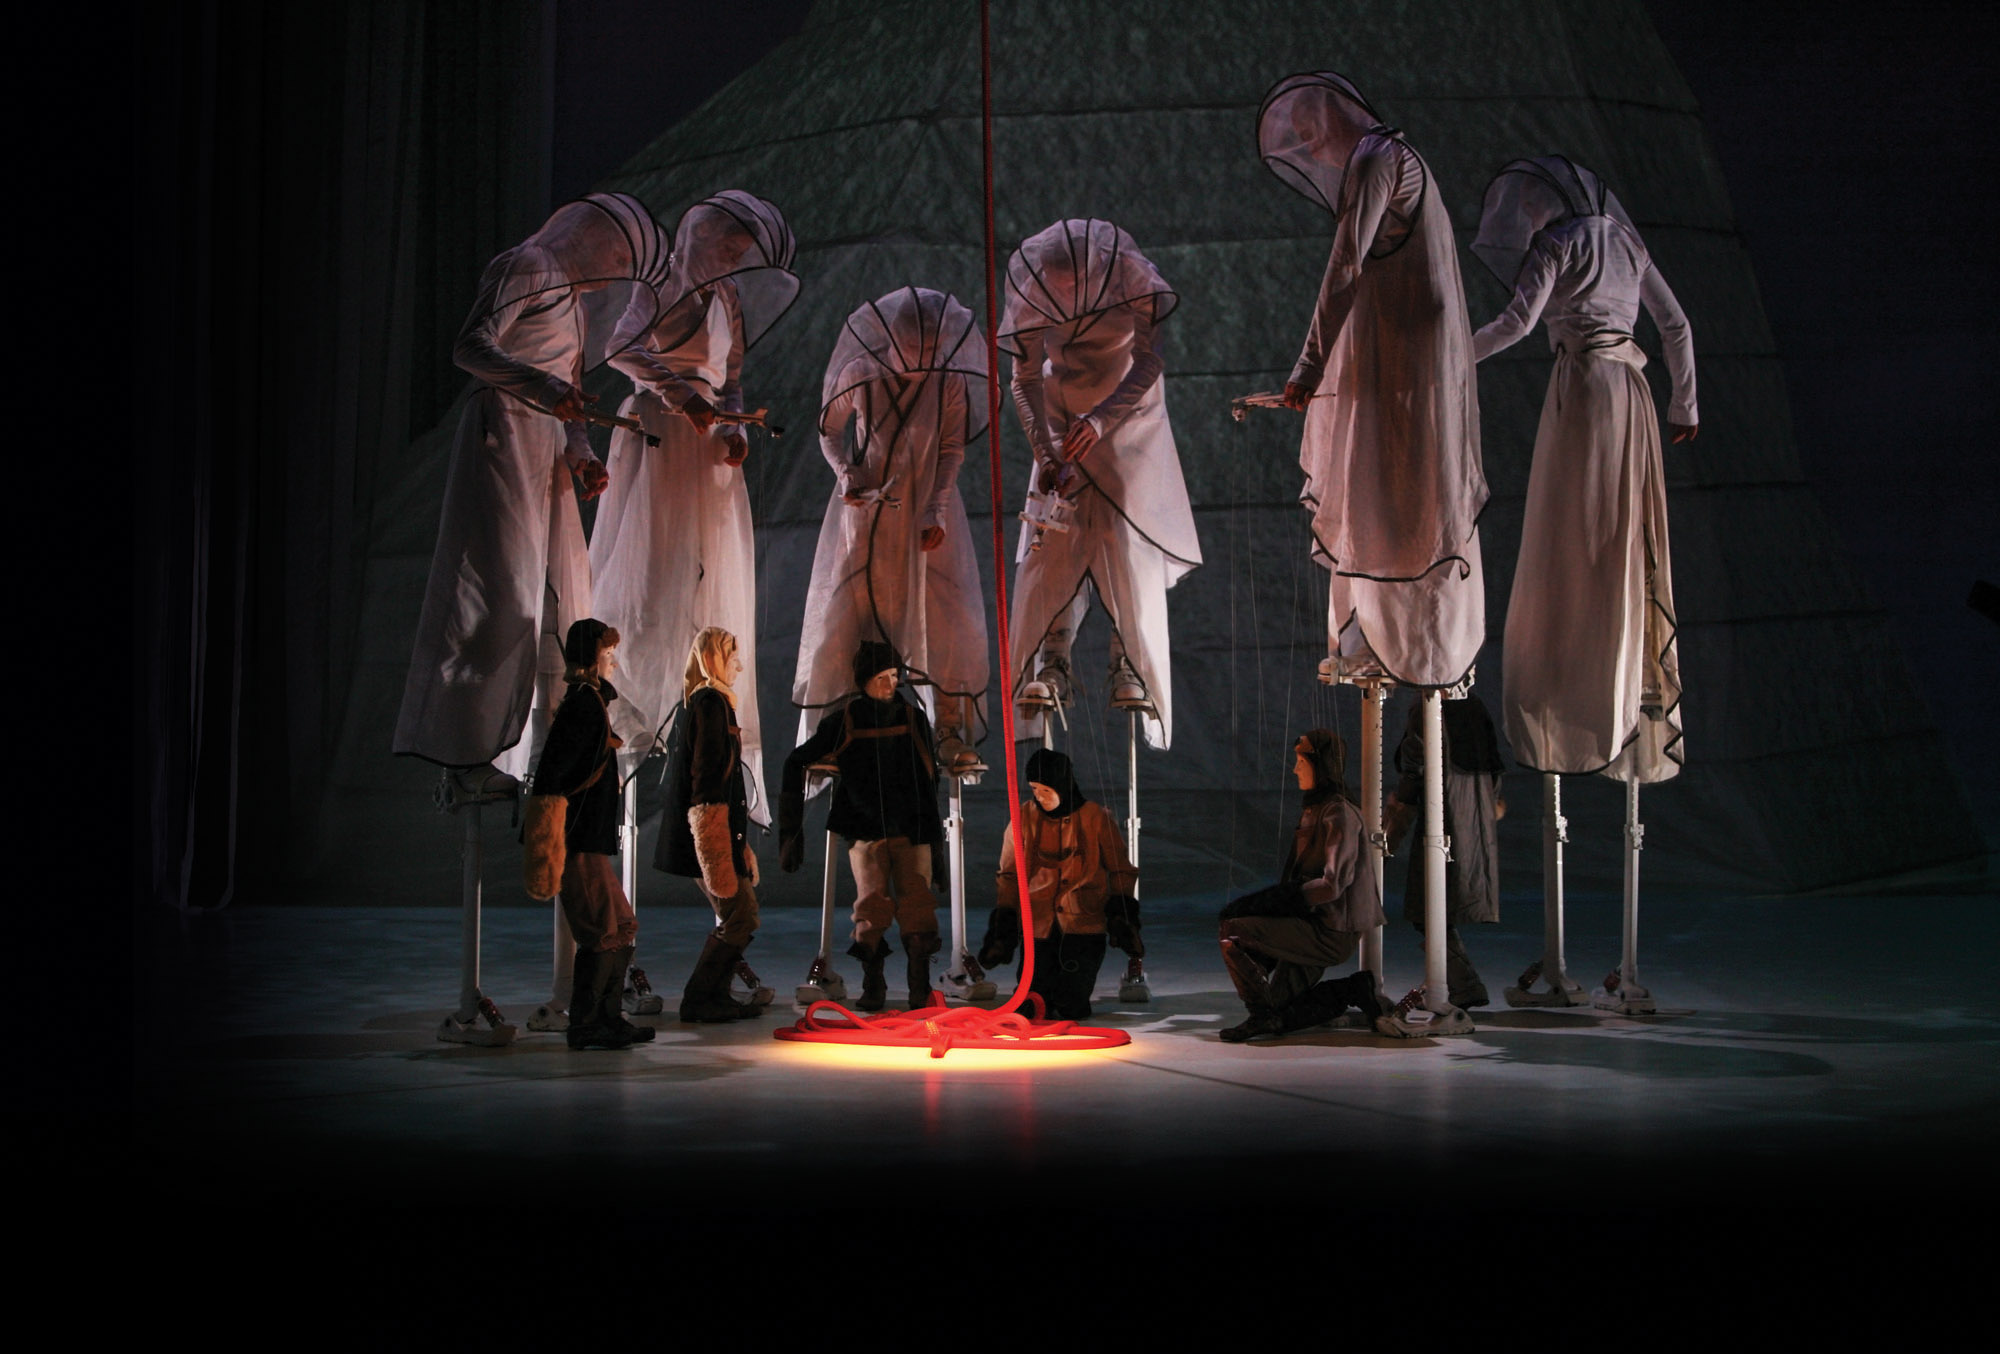 A group of six puppeteers dressed in hooded white robes on stilts working large marionettes gathered around a lit red rope. 